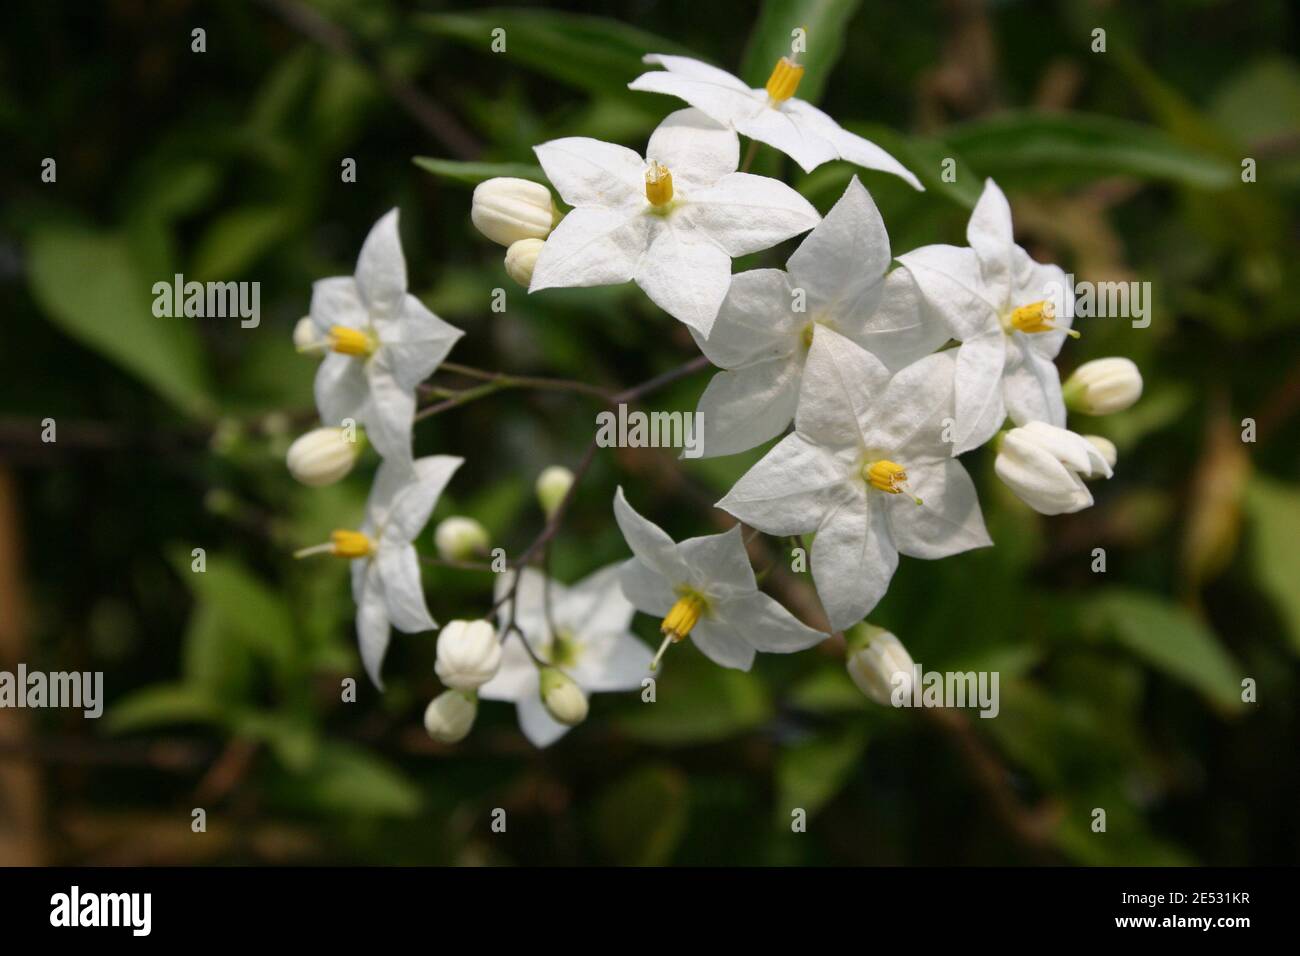 CLOSE UP OF THE WHITE FLOWERS OF SOLANUM JASMINOIDES COMMONLY KNOWN AS THE POTATO VINE. Stock Photo